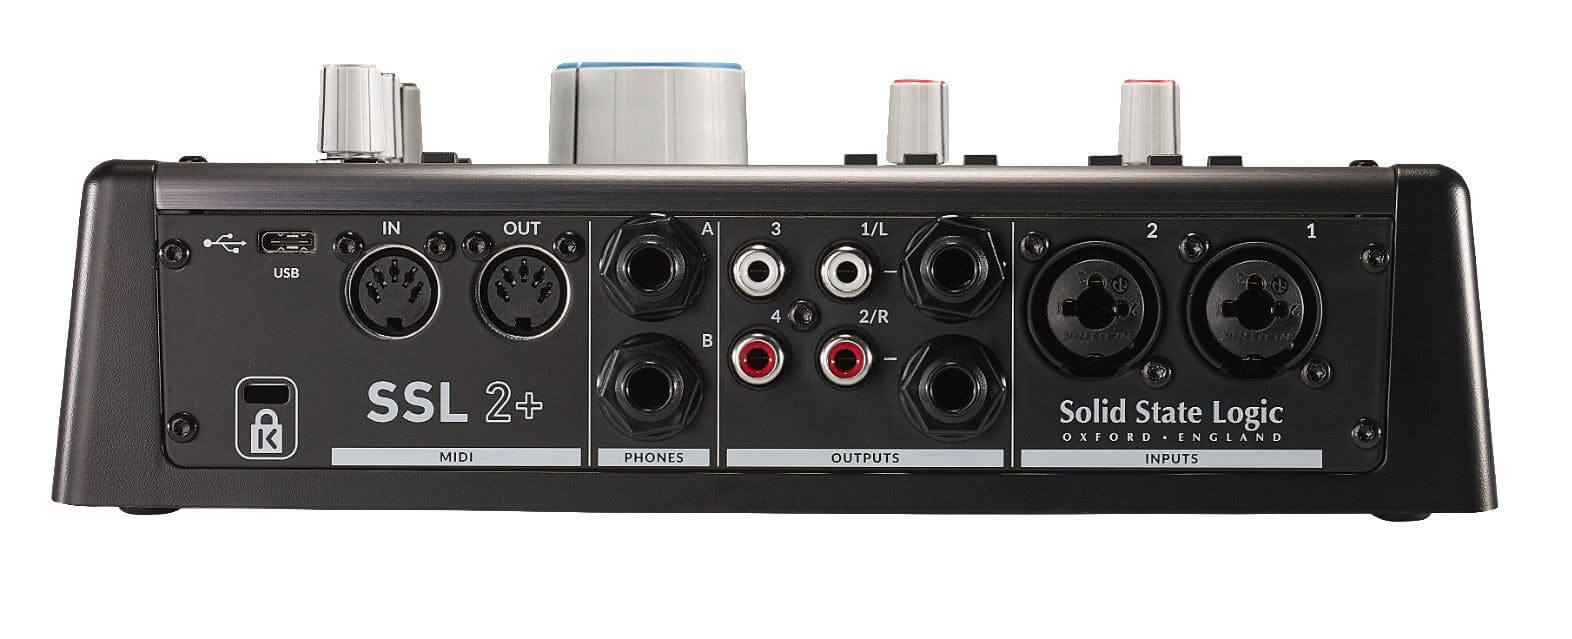 Two XLR/¼” inputs allow for microphones and instruments to connect to the SSL 2+. It features MIDI In/Out connectivity too, so it's also futureproofed should you expand your studio. Furthermore, RCA outputs allow you to connect to performance equipment such as turntables! Its simple design and plethora of inputs/outputs allow beginners to expand their home studio as and when they need.